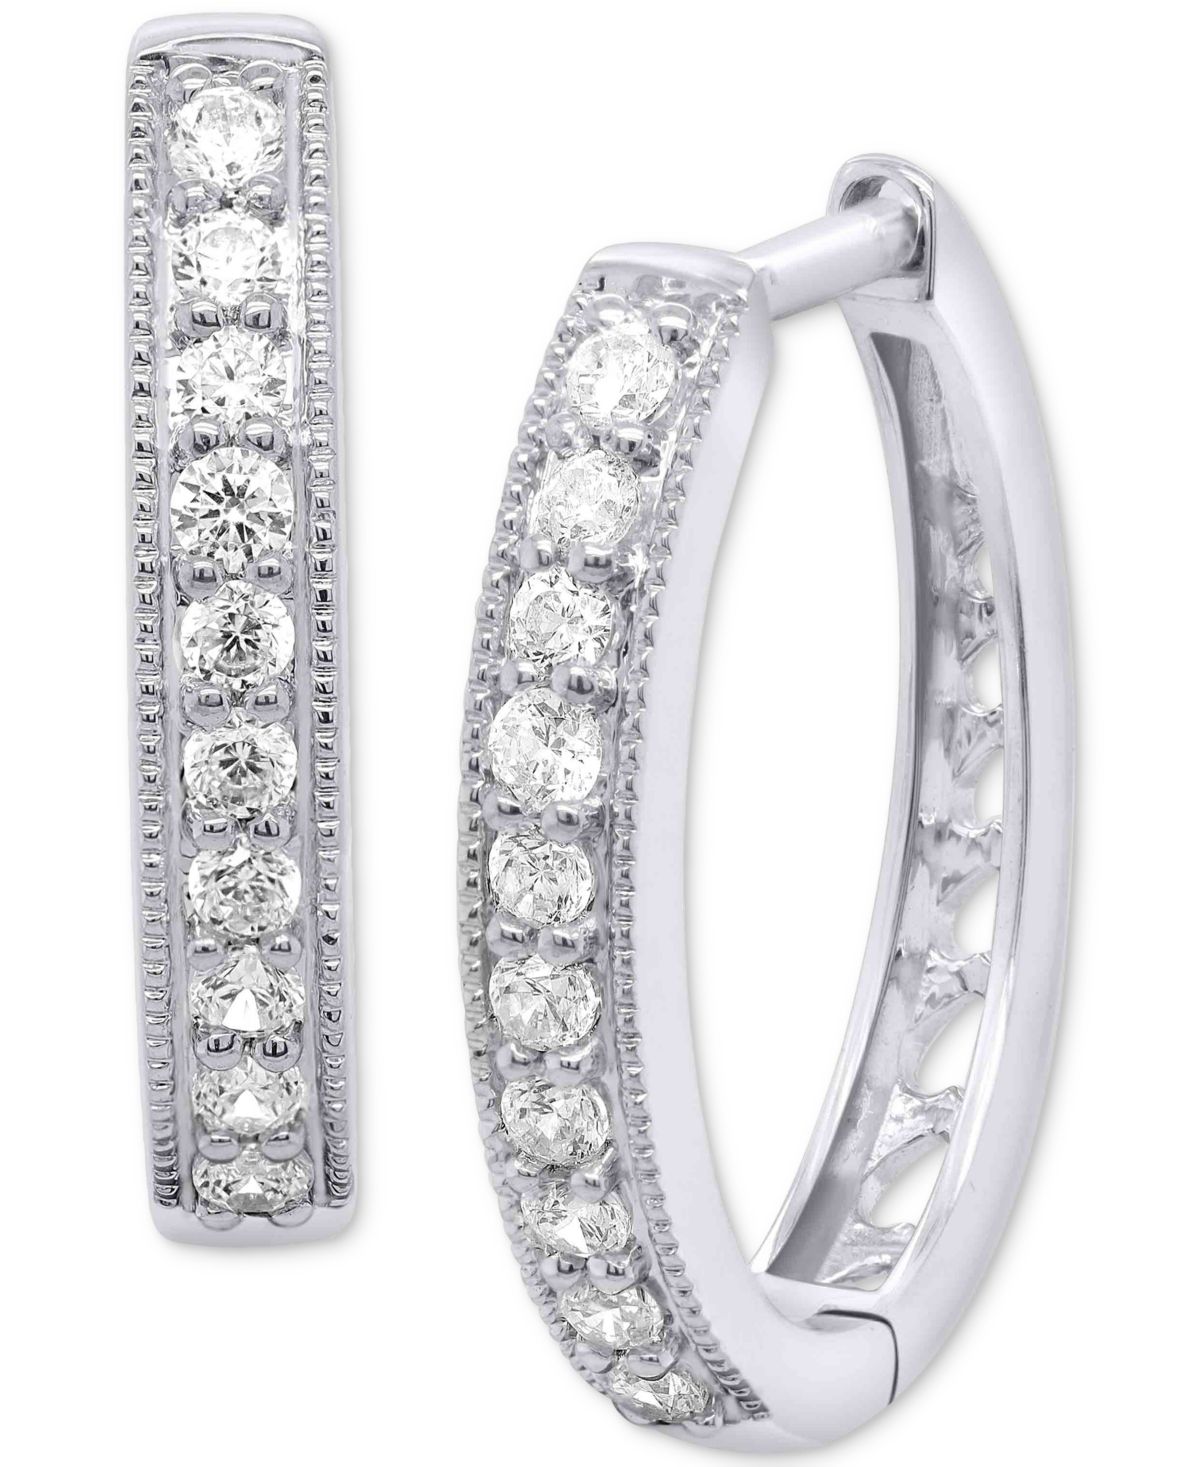 FOREVER GROWN DIAMONDS LAB-CREATED DIAMOND SMALL HOOP EARRINGS (1/2 CT. T.W.) IN STERLING SILVER